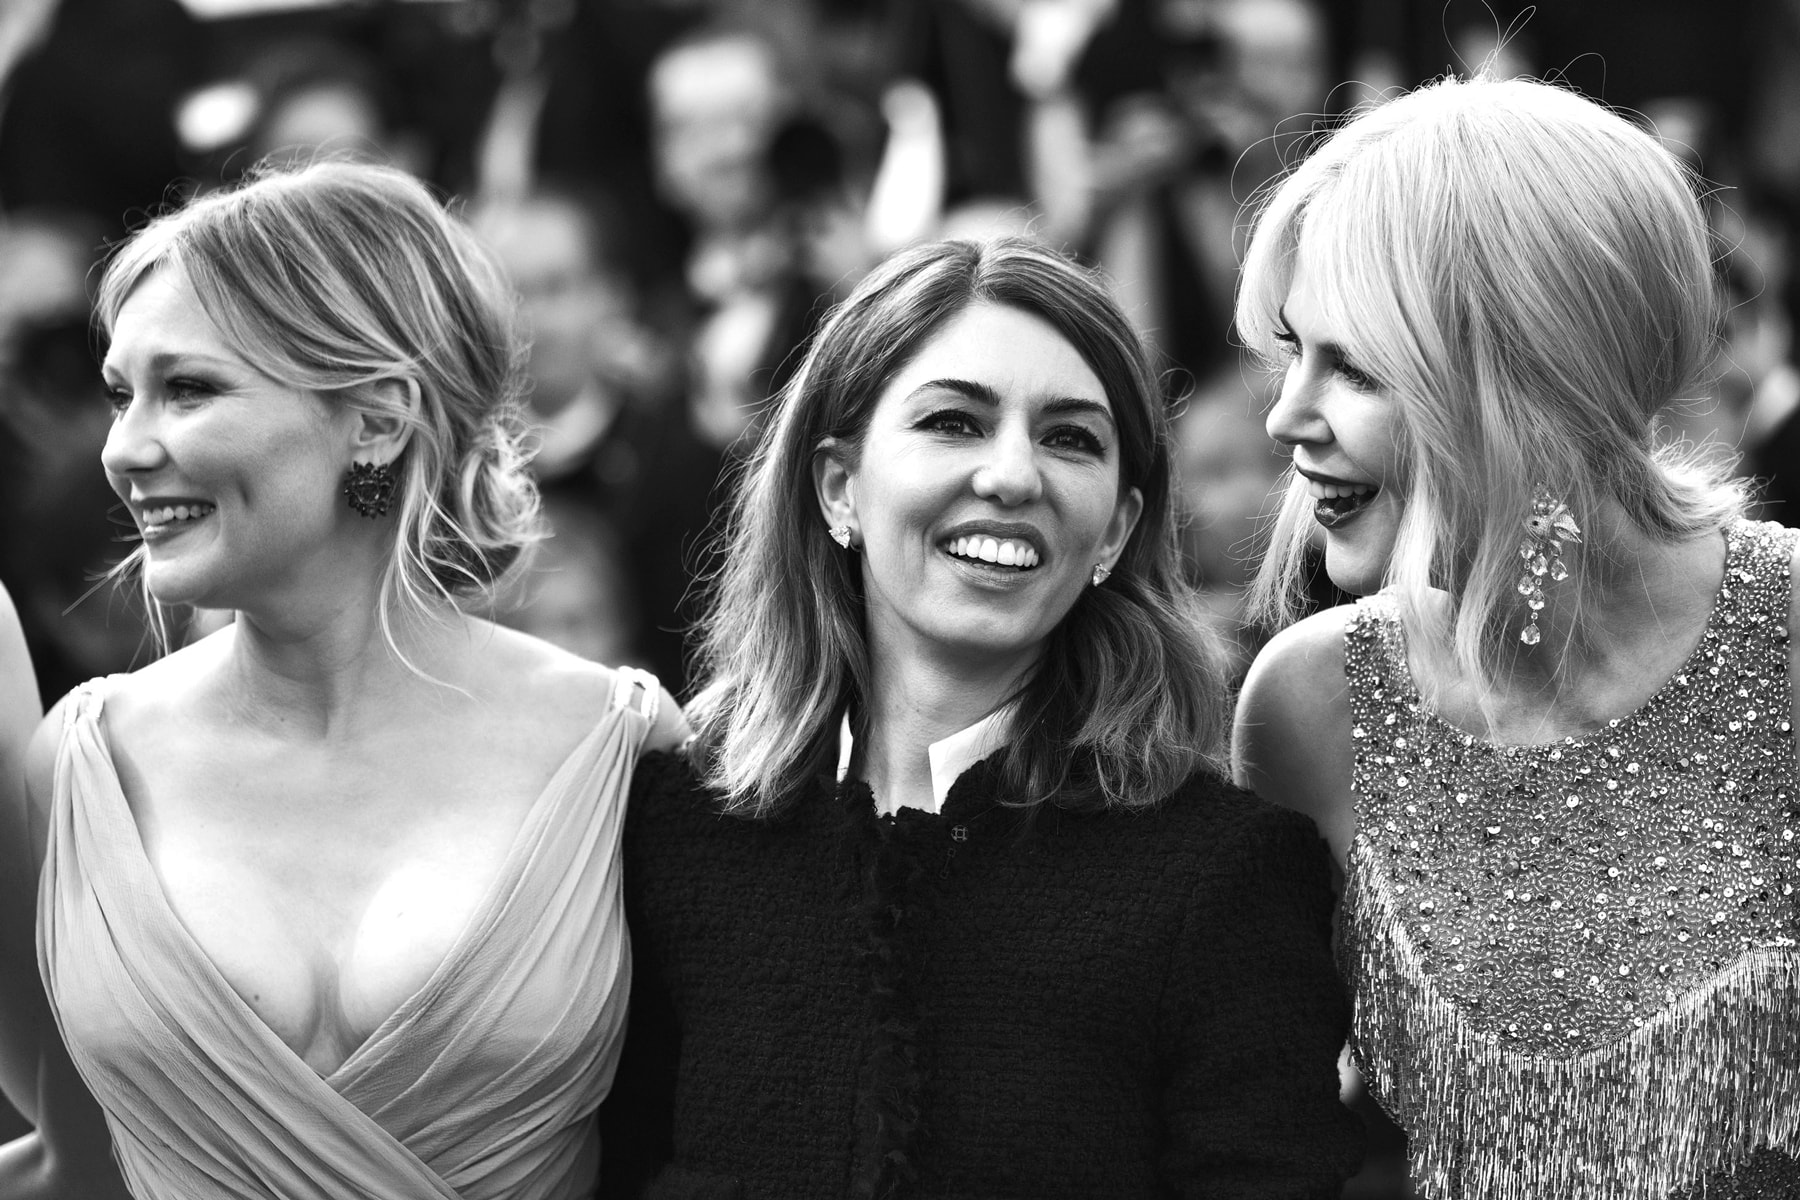 Sofia Coppola Cannes Best Director 'The Beguiled'